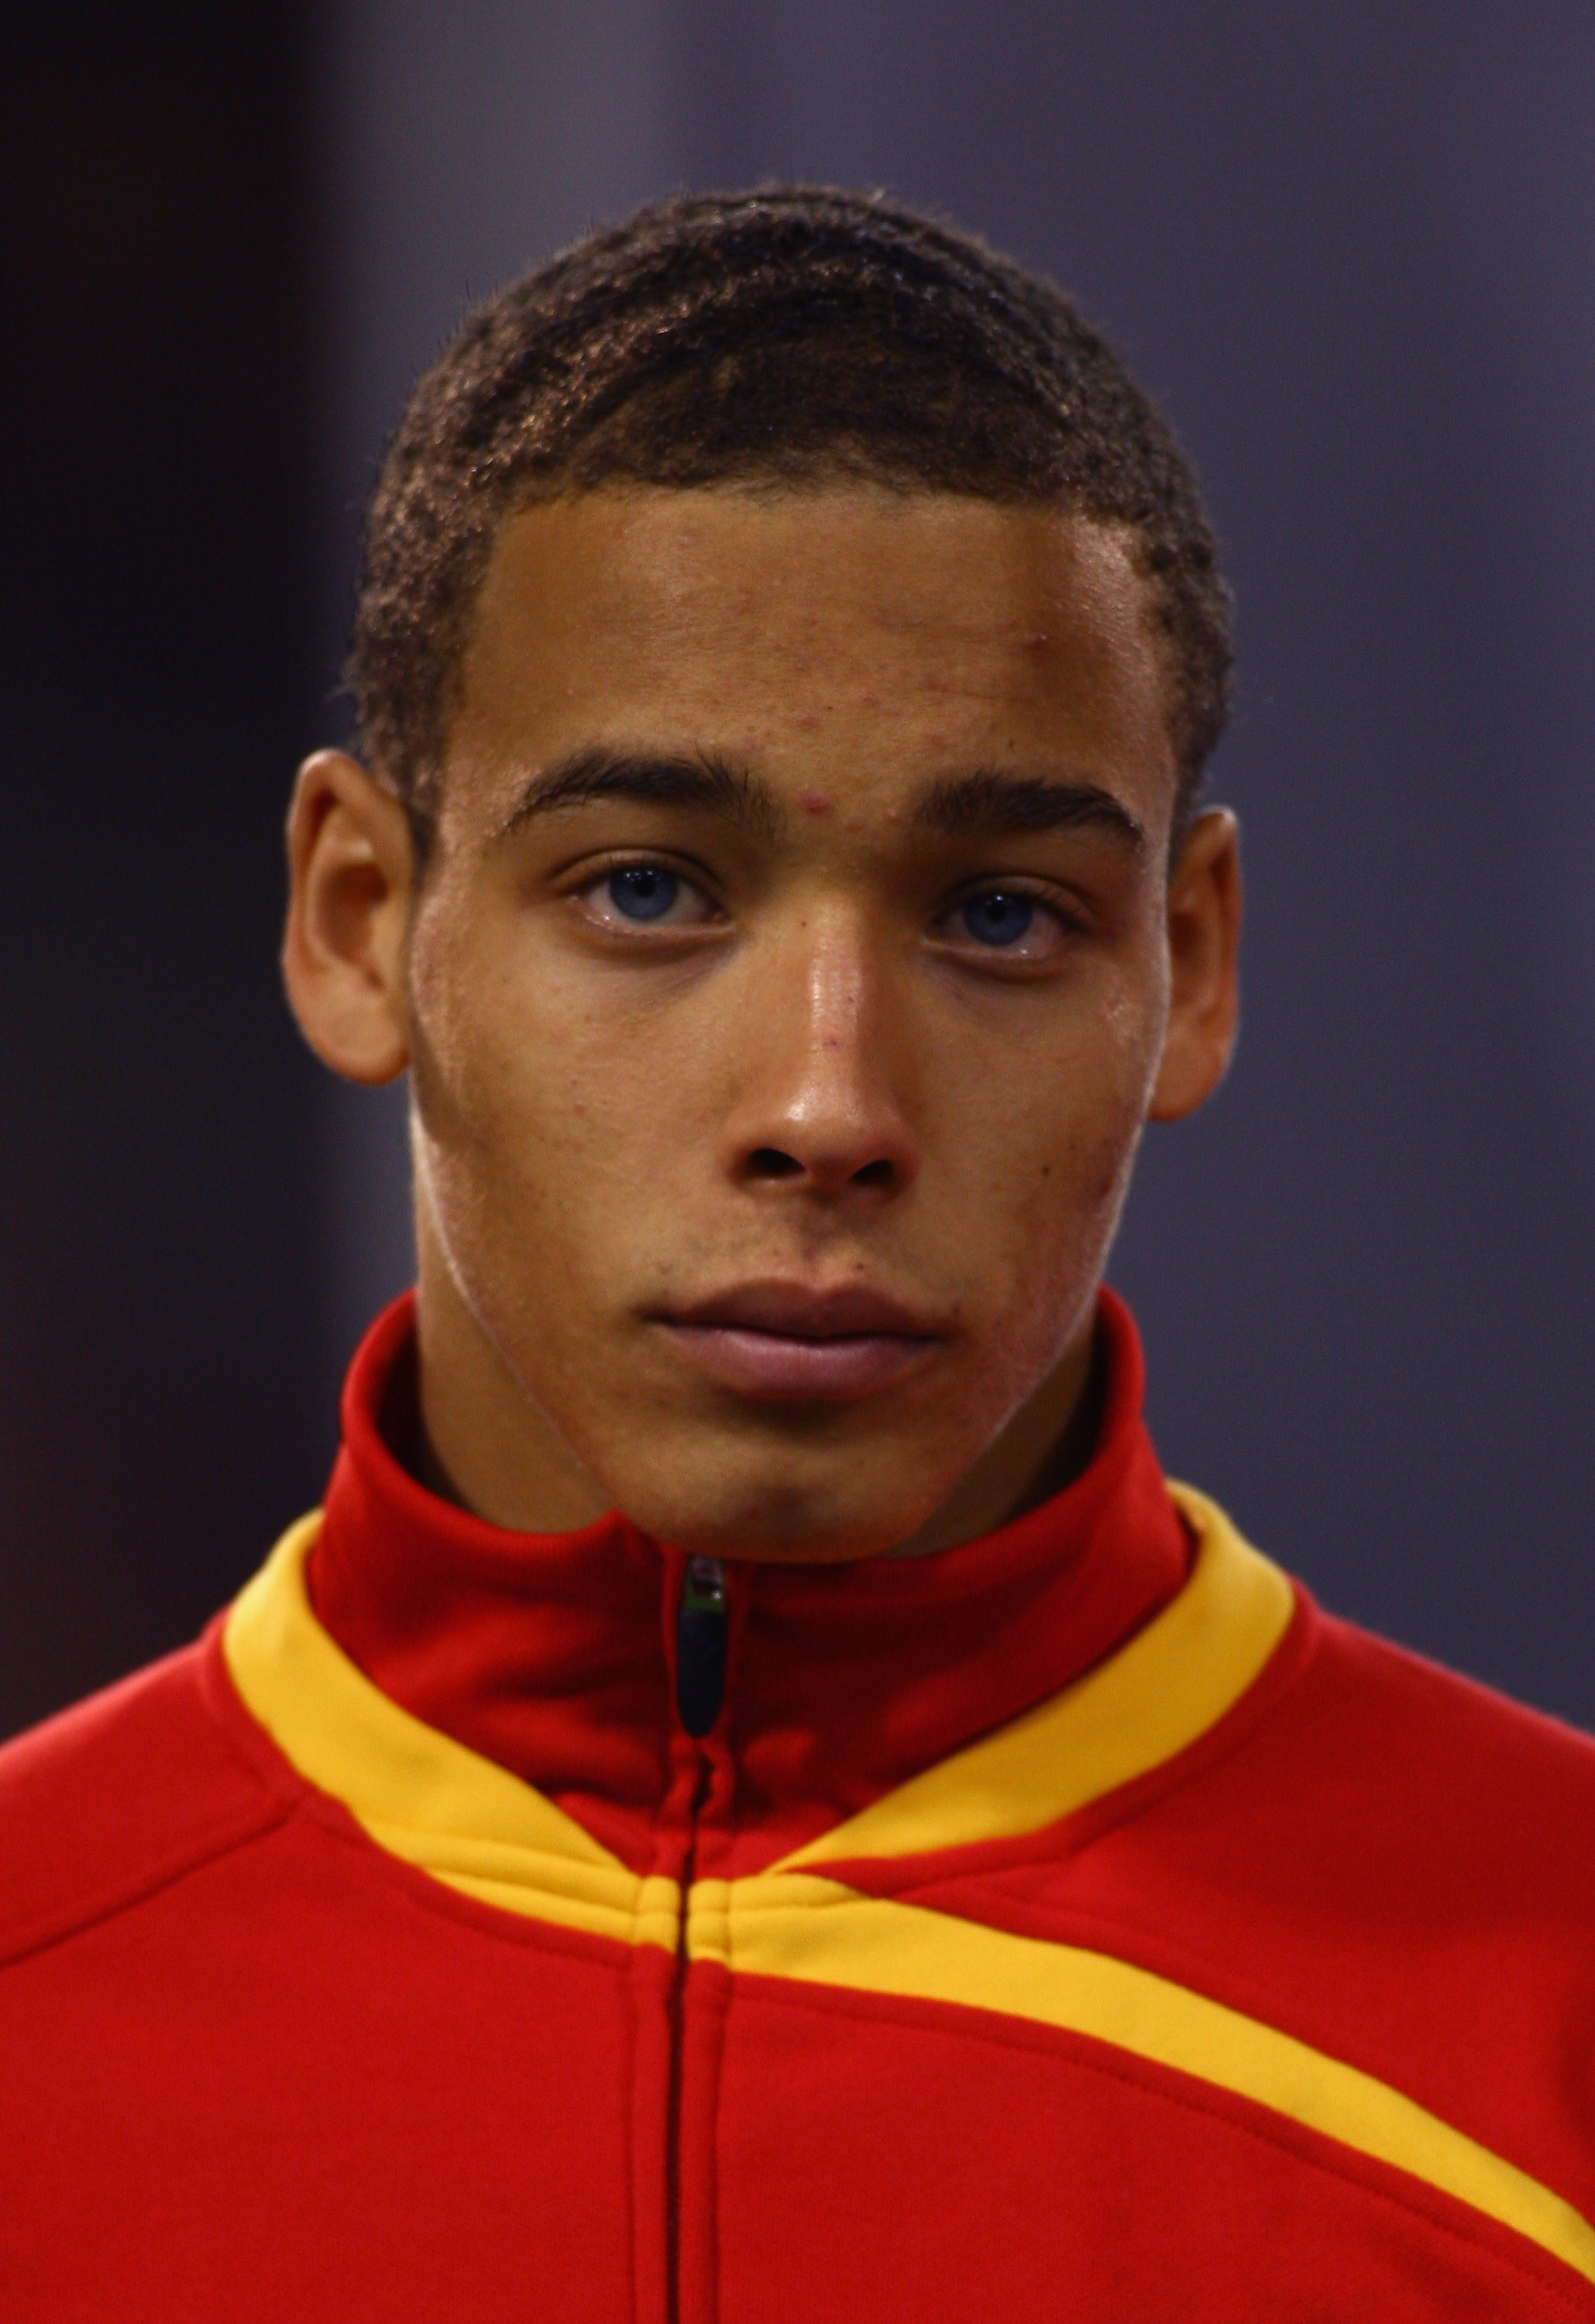 BRUSSELS, BELGIUM - OCTOBER 15:  Axel Witsel of Belgium lines up for the National Anthems prior to the FIFA 2010 World Cup Group 5 Qualifier between Belgium and Spain at the King Baudouin Stadium on October 15, 2008 in Brussels, Belgium.  (Photo by Mike H